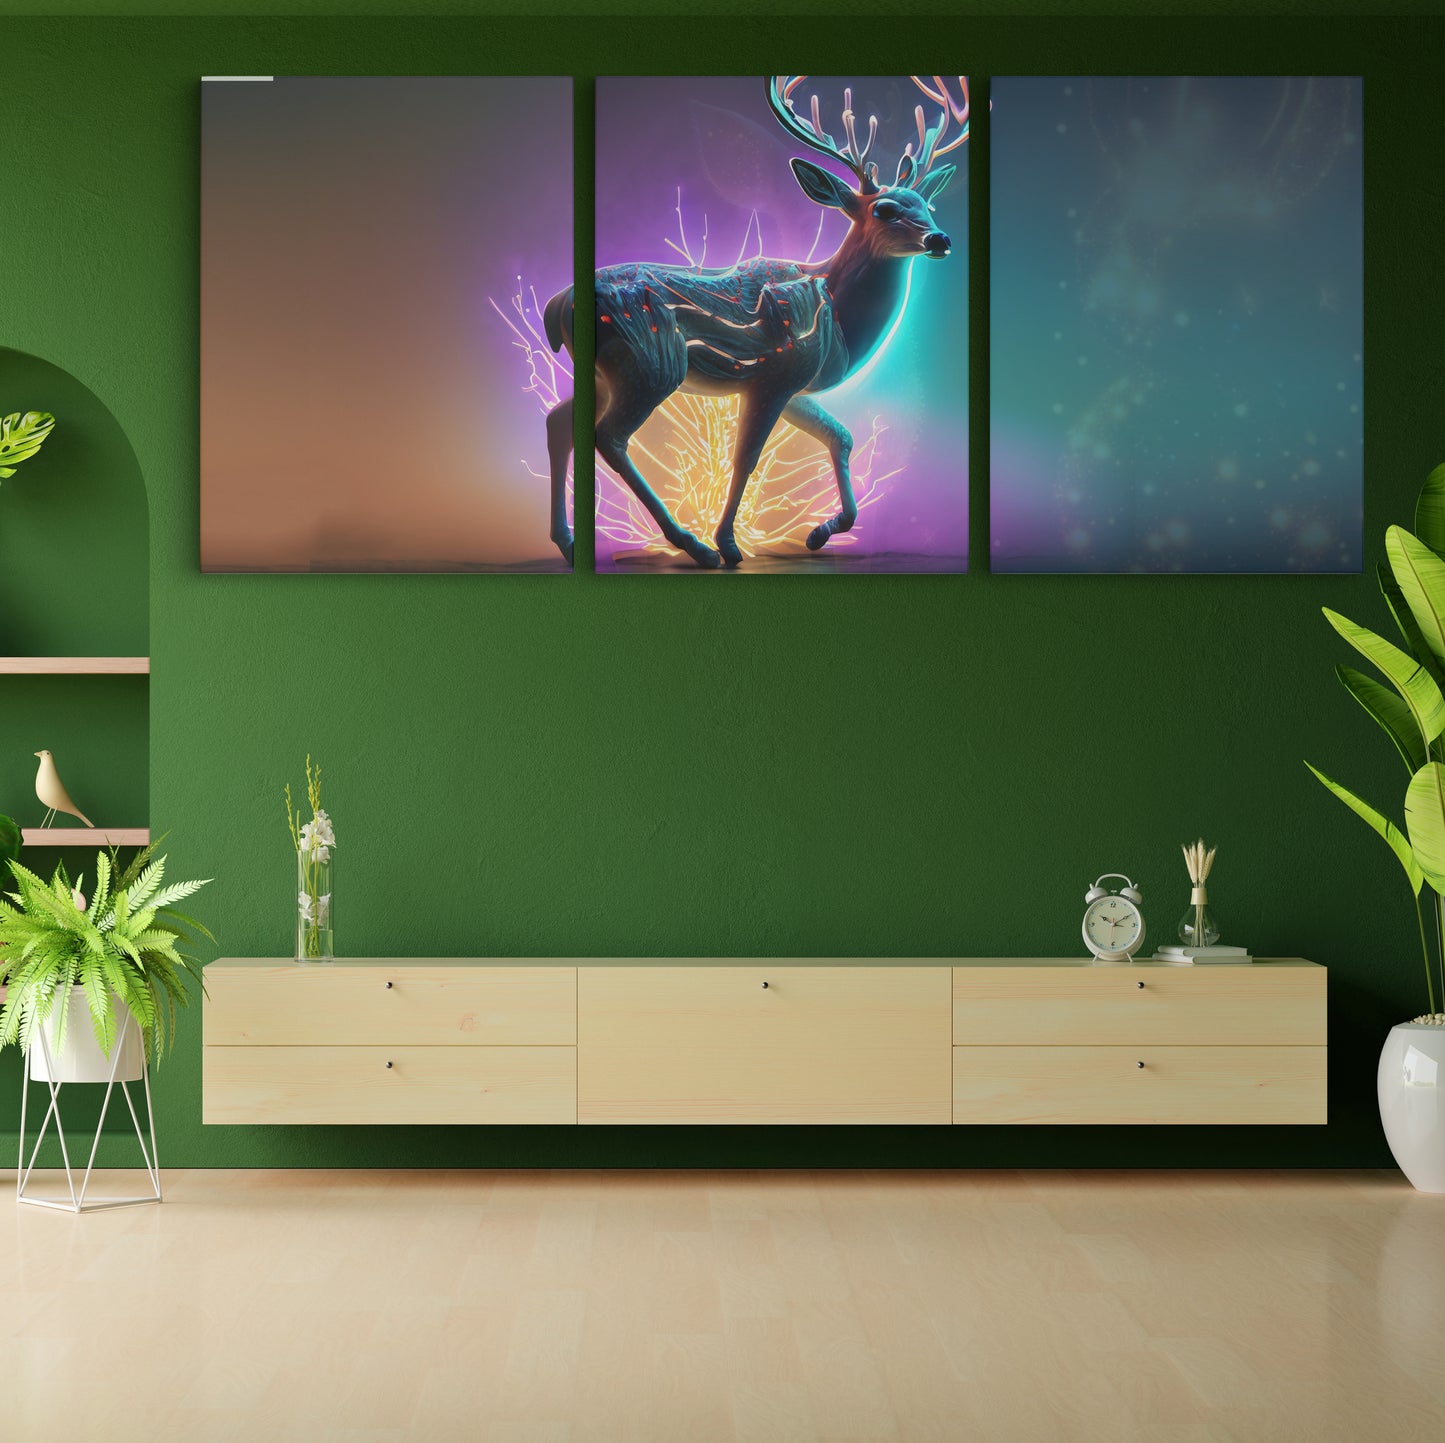 Radiant Majesty: Glowing Neon Deer - Captivating Wall Art Celebrating the Mesmerizing Glow and Regal Presence of a Luminous Deer - S06E06